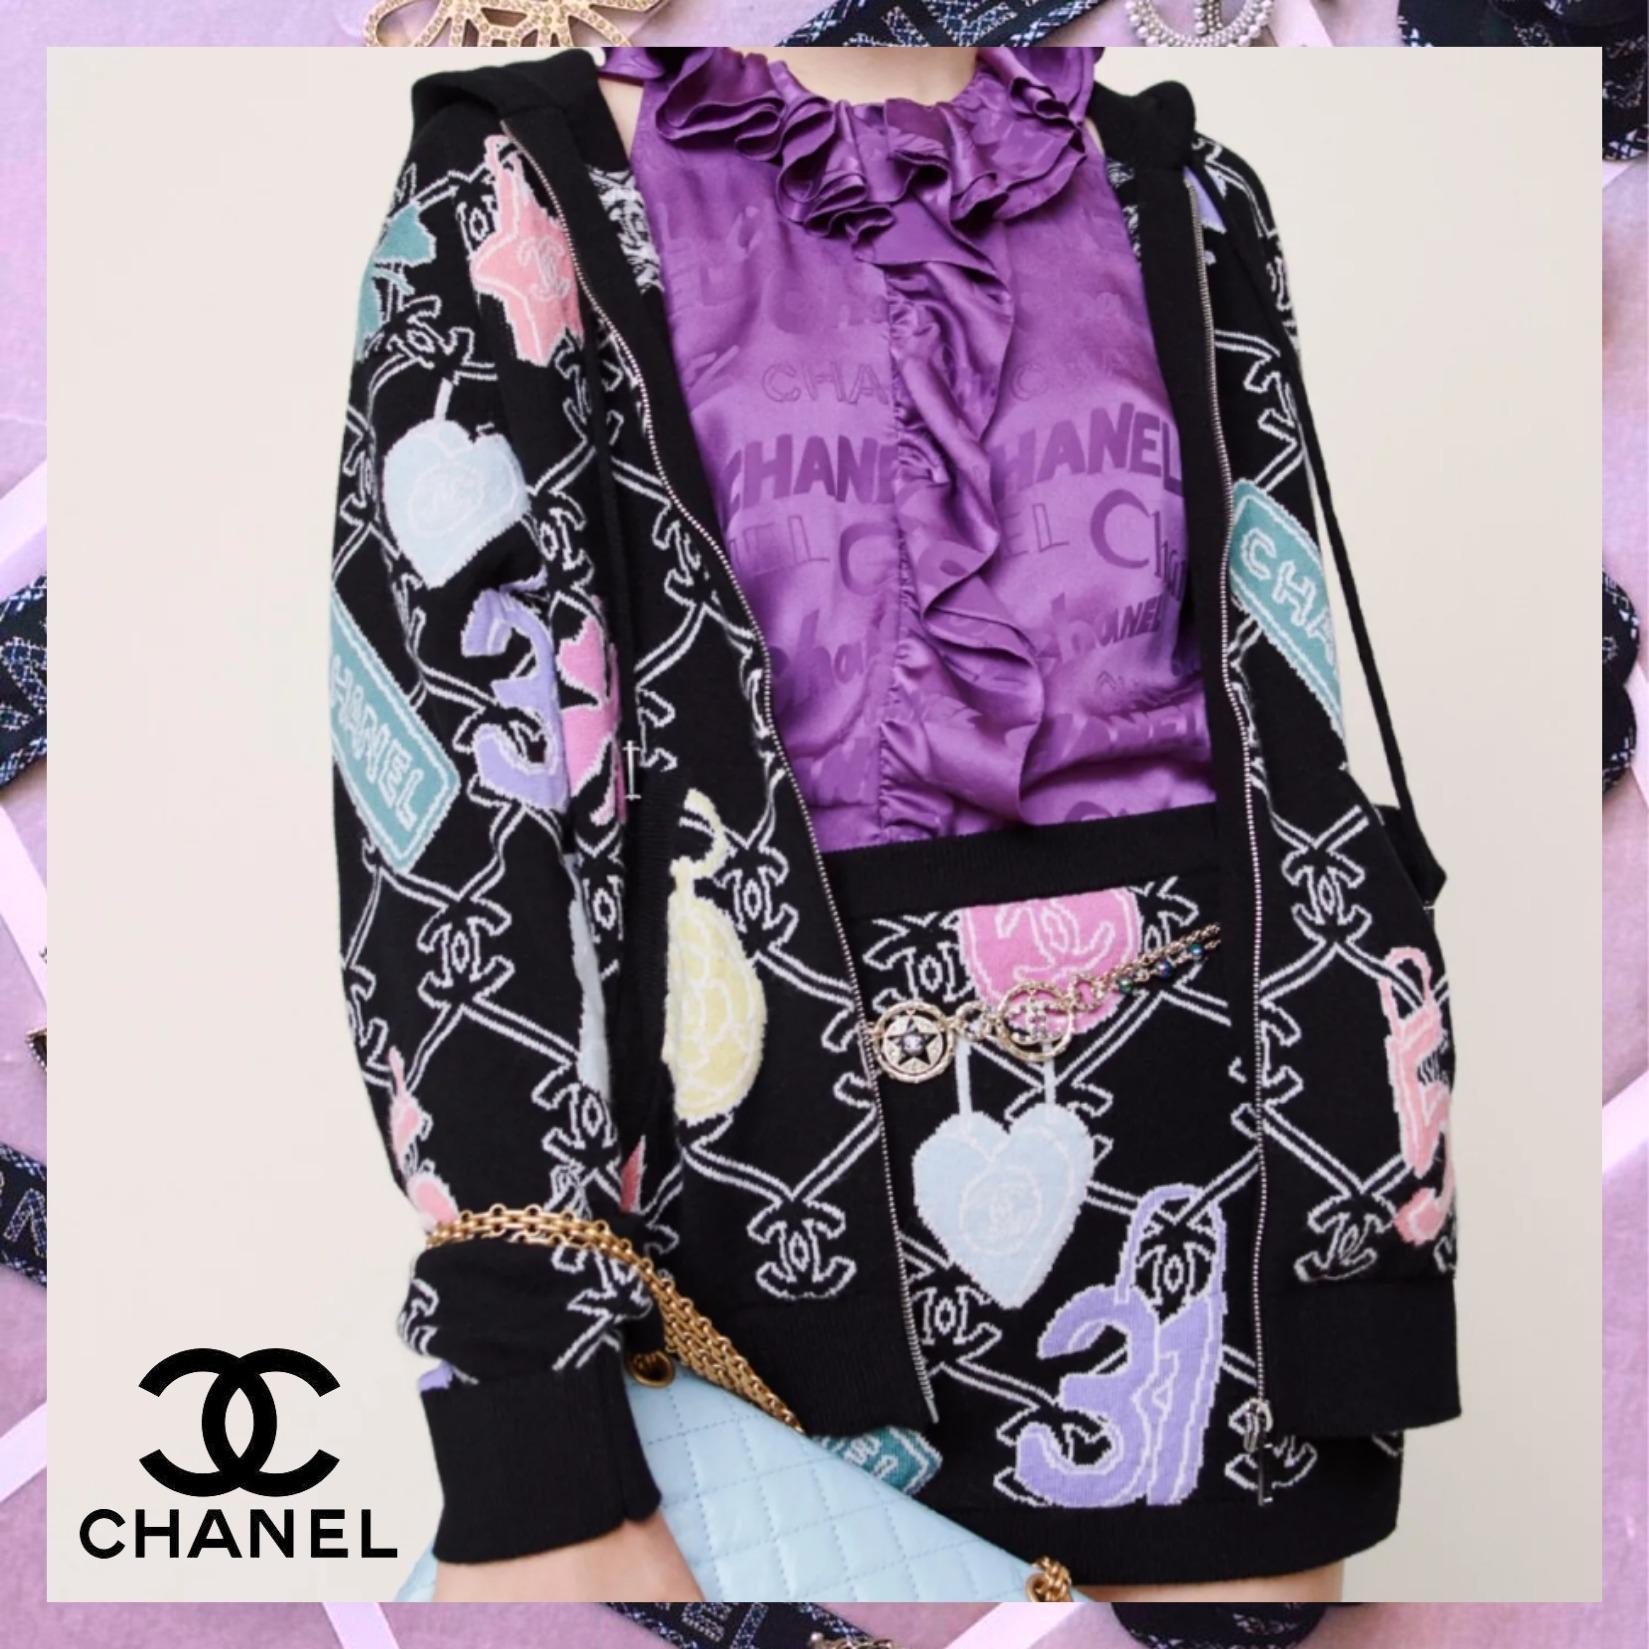 New fabulous Chanel black cashmere hoodie / cardigan with CC logo and Lucky Symbols pattern from 2022 Spring Collection.
Price on other sources starts at 5,000-6,000$
Size mark 34 FR, comes as oversized. Included Chanel dustbag.
- CC logo hardware